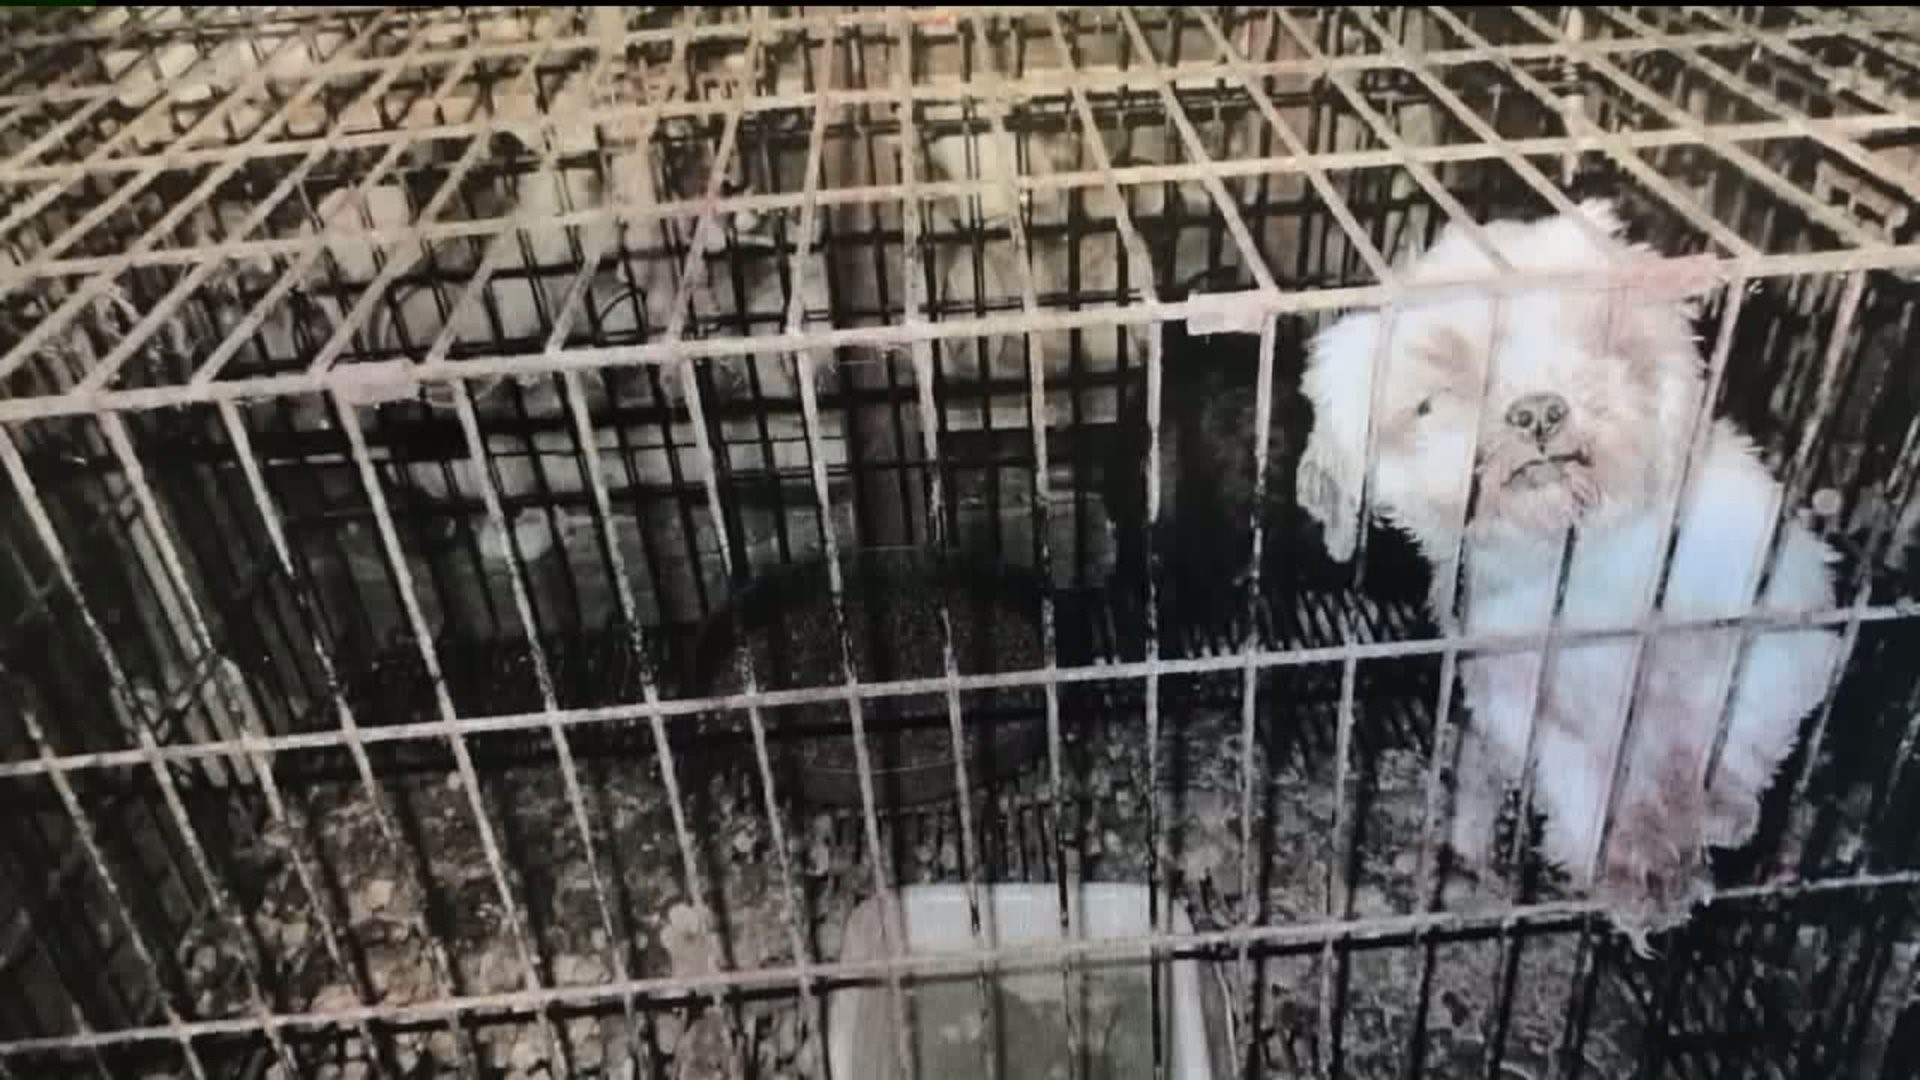 Dogs Rescued from Breeder